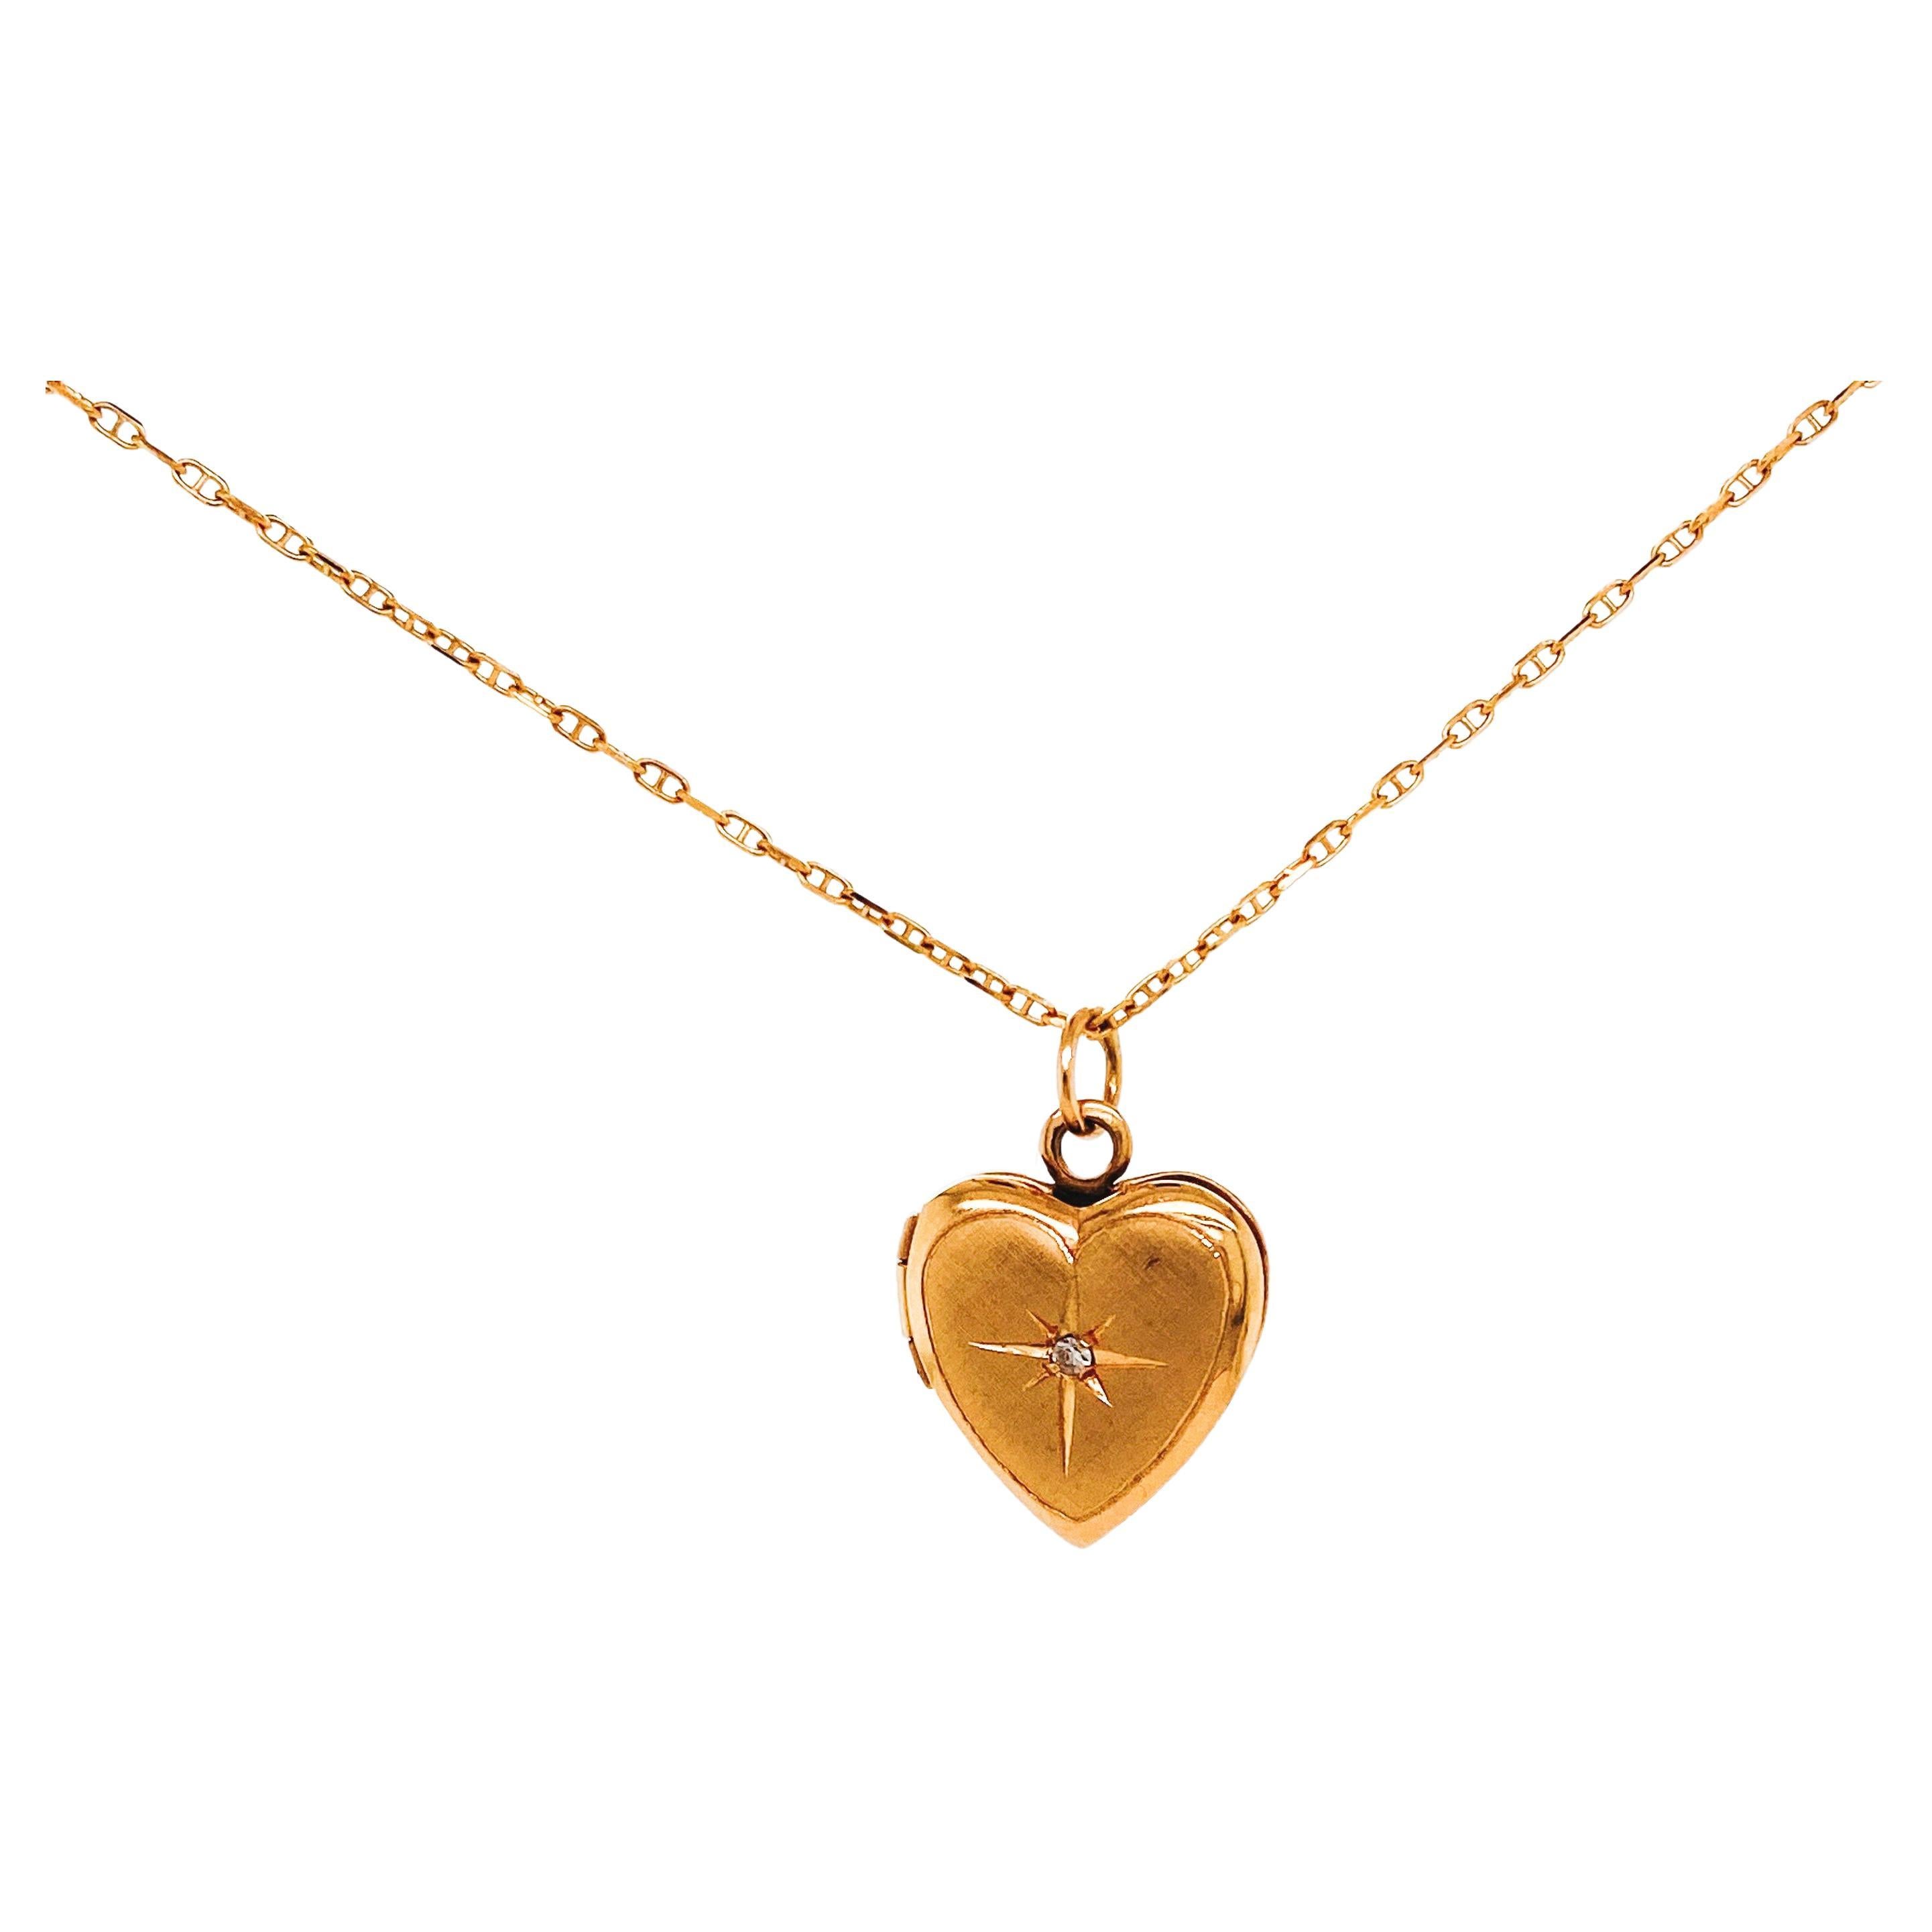 Vintage Heart Diamond Locket Necklace in 14K Yellow Gold with Anchor Link Chain For Sale